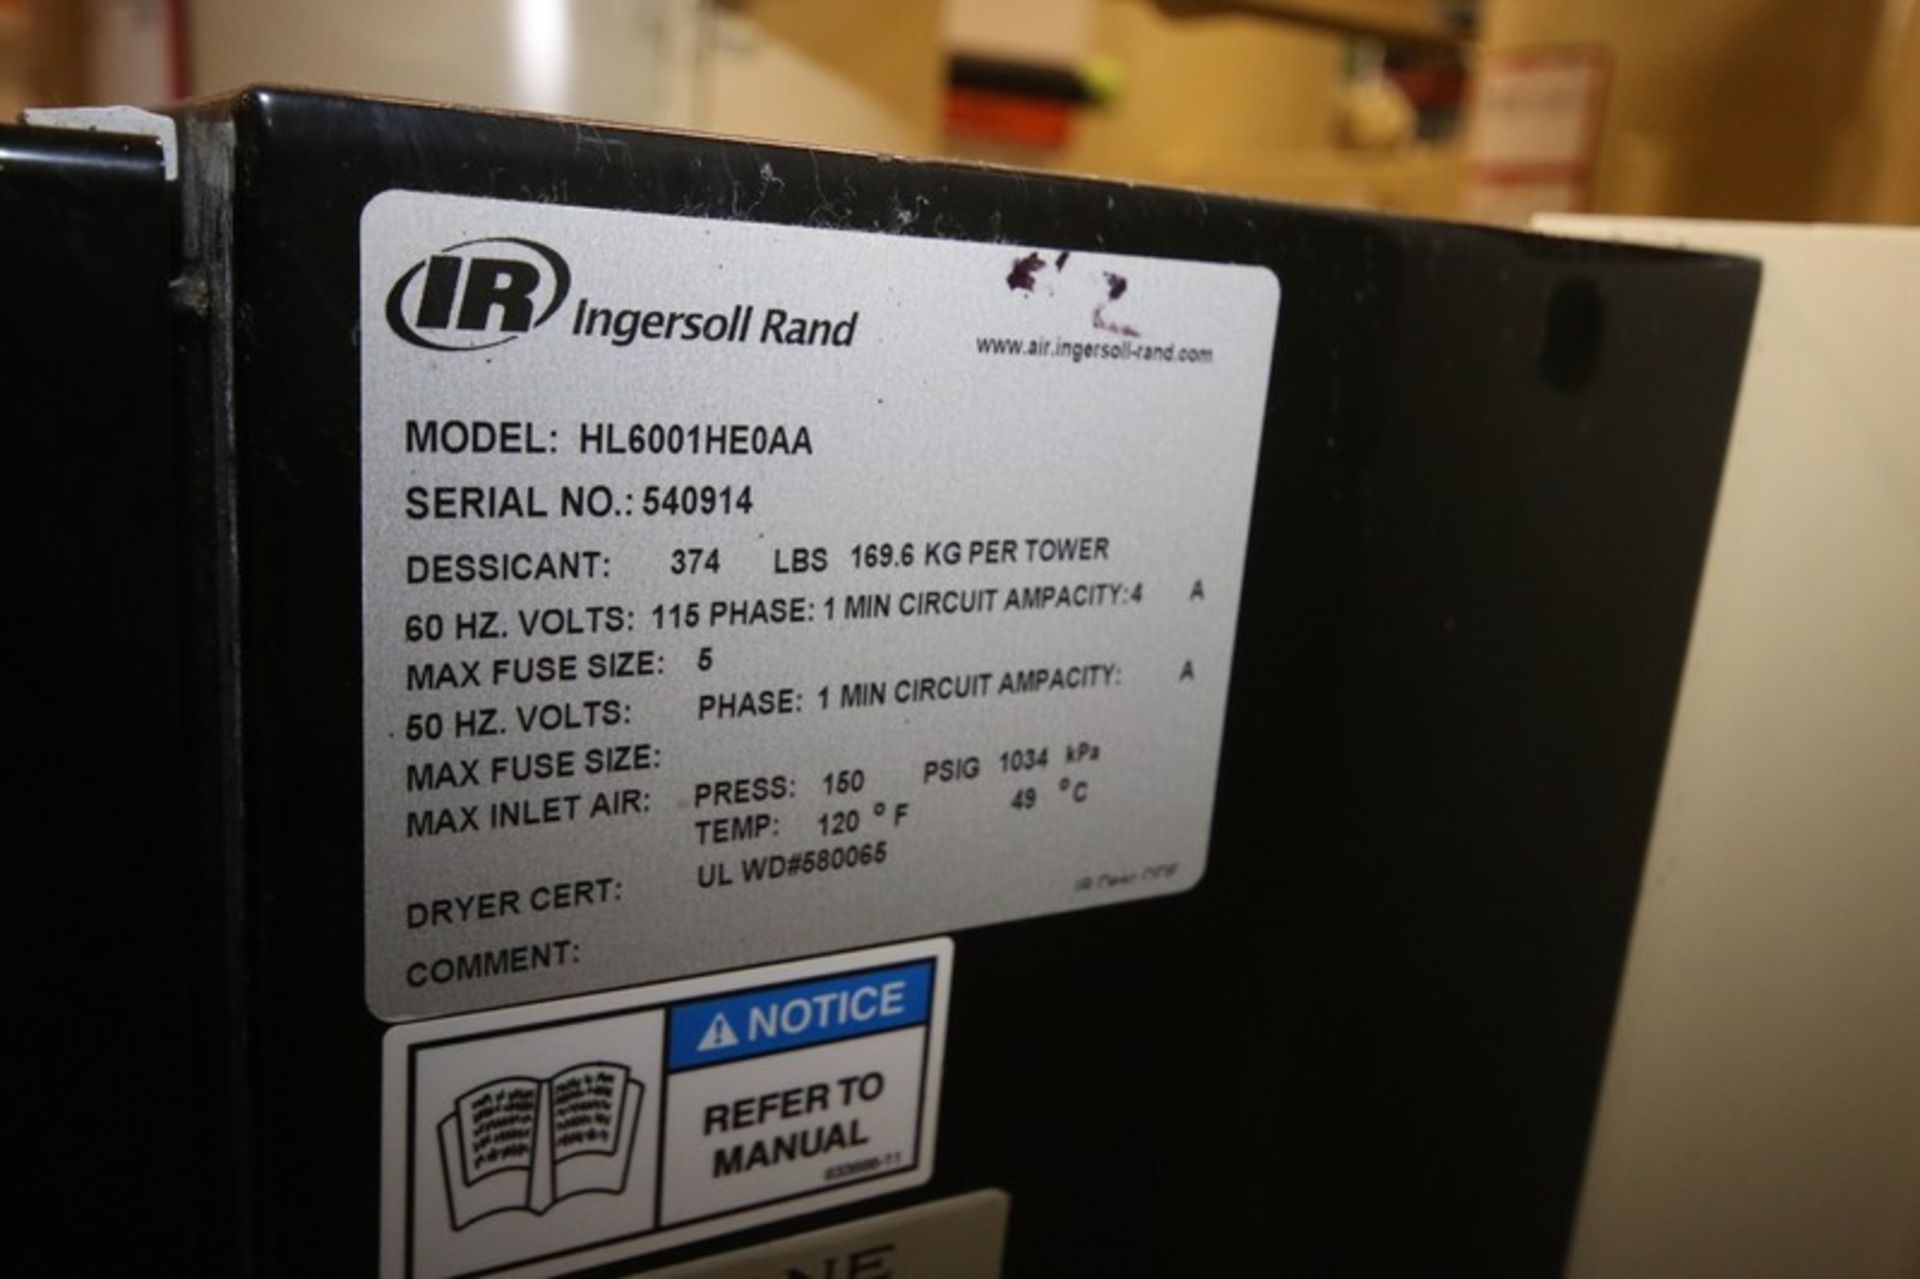 2013 Ingersol Rand Desiccant Air Dryer, Model HL6001HE0AA, SN 540914, 150 PSIG, Single Phase with - Image 4 of 4